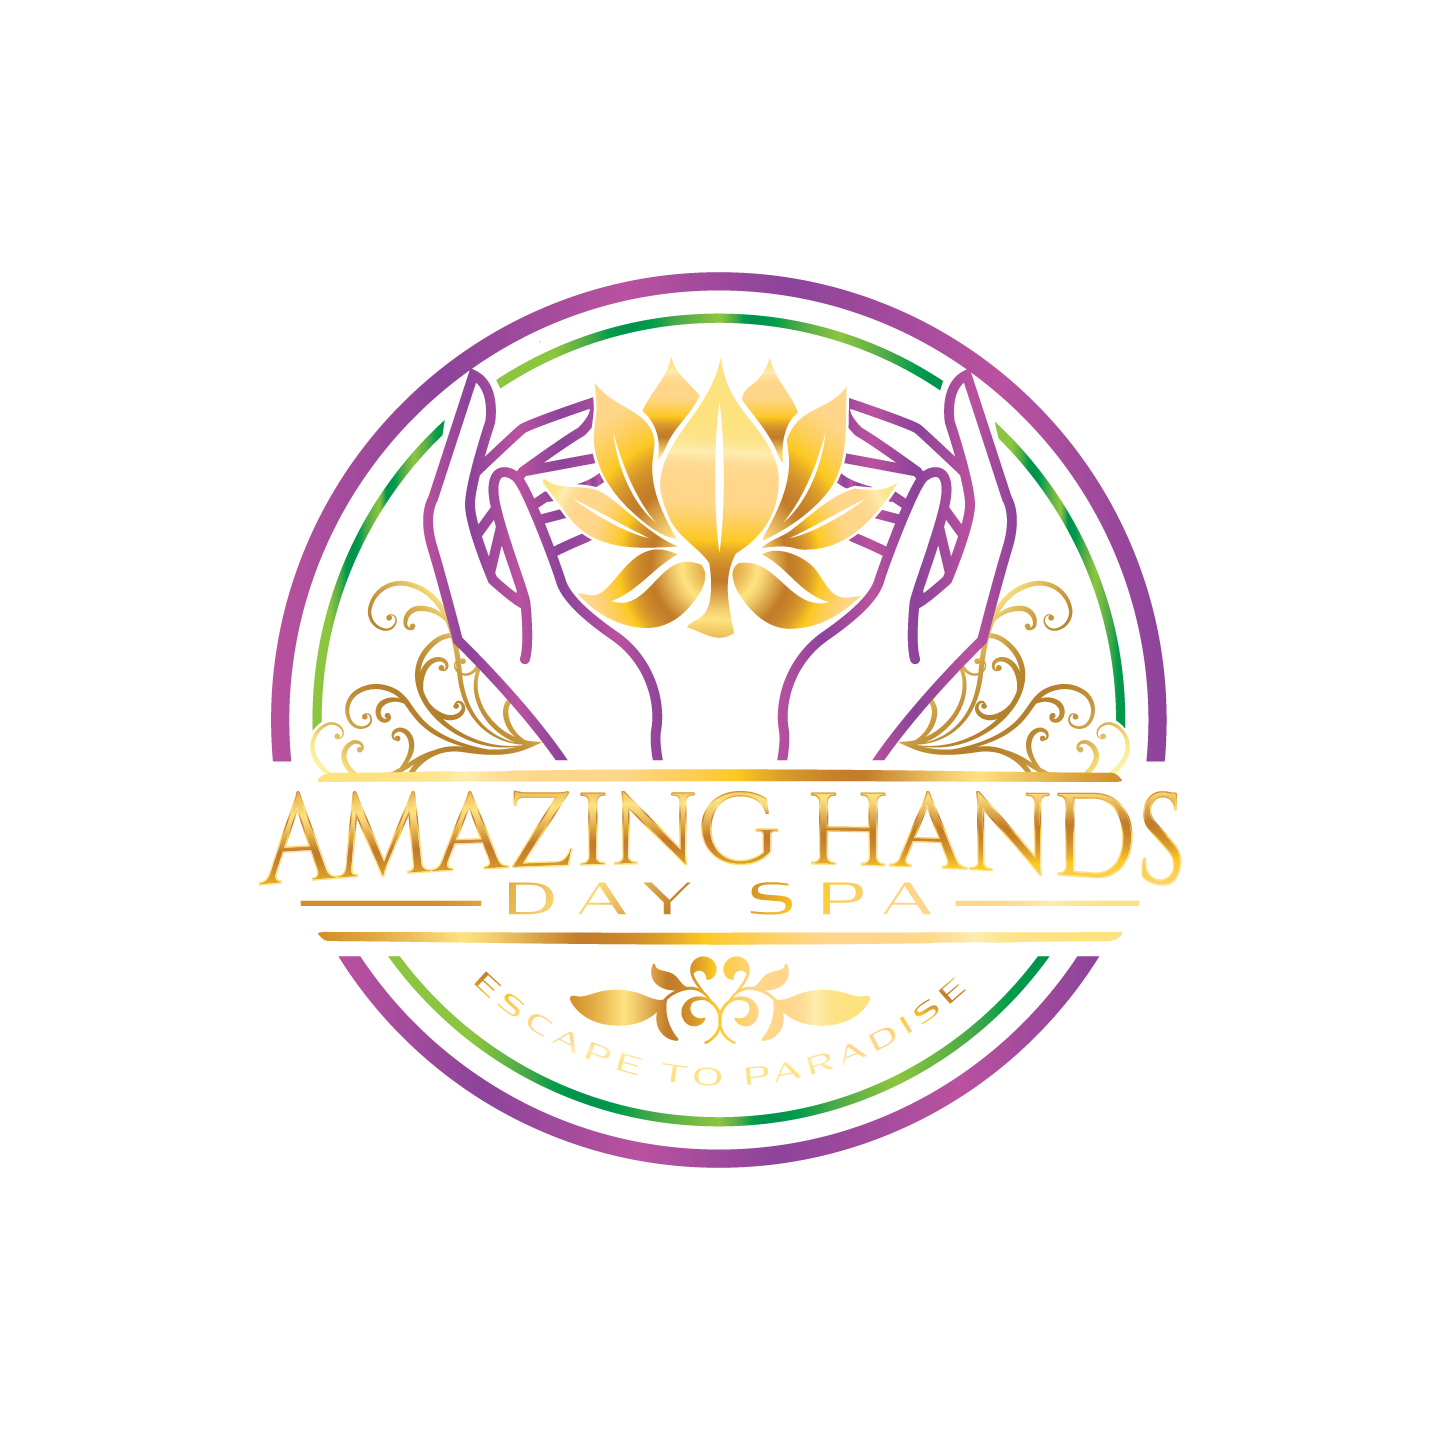 Amazing Hands Day Spa